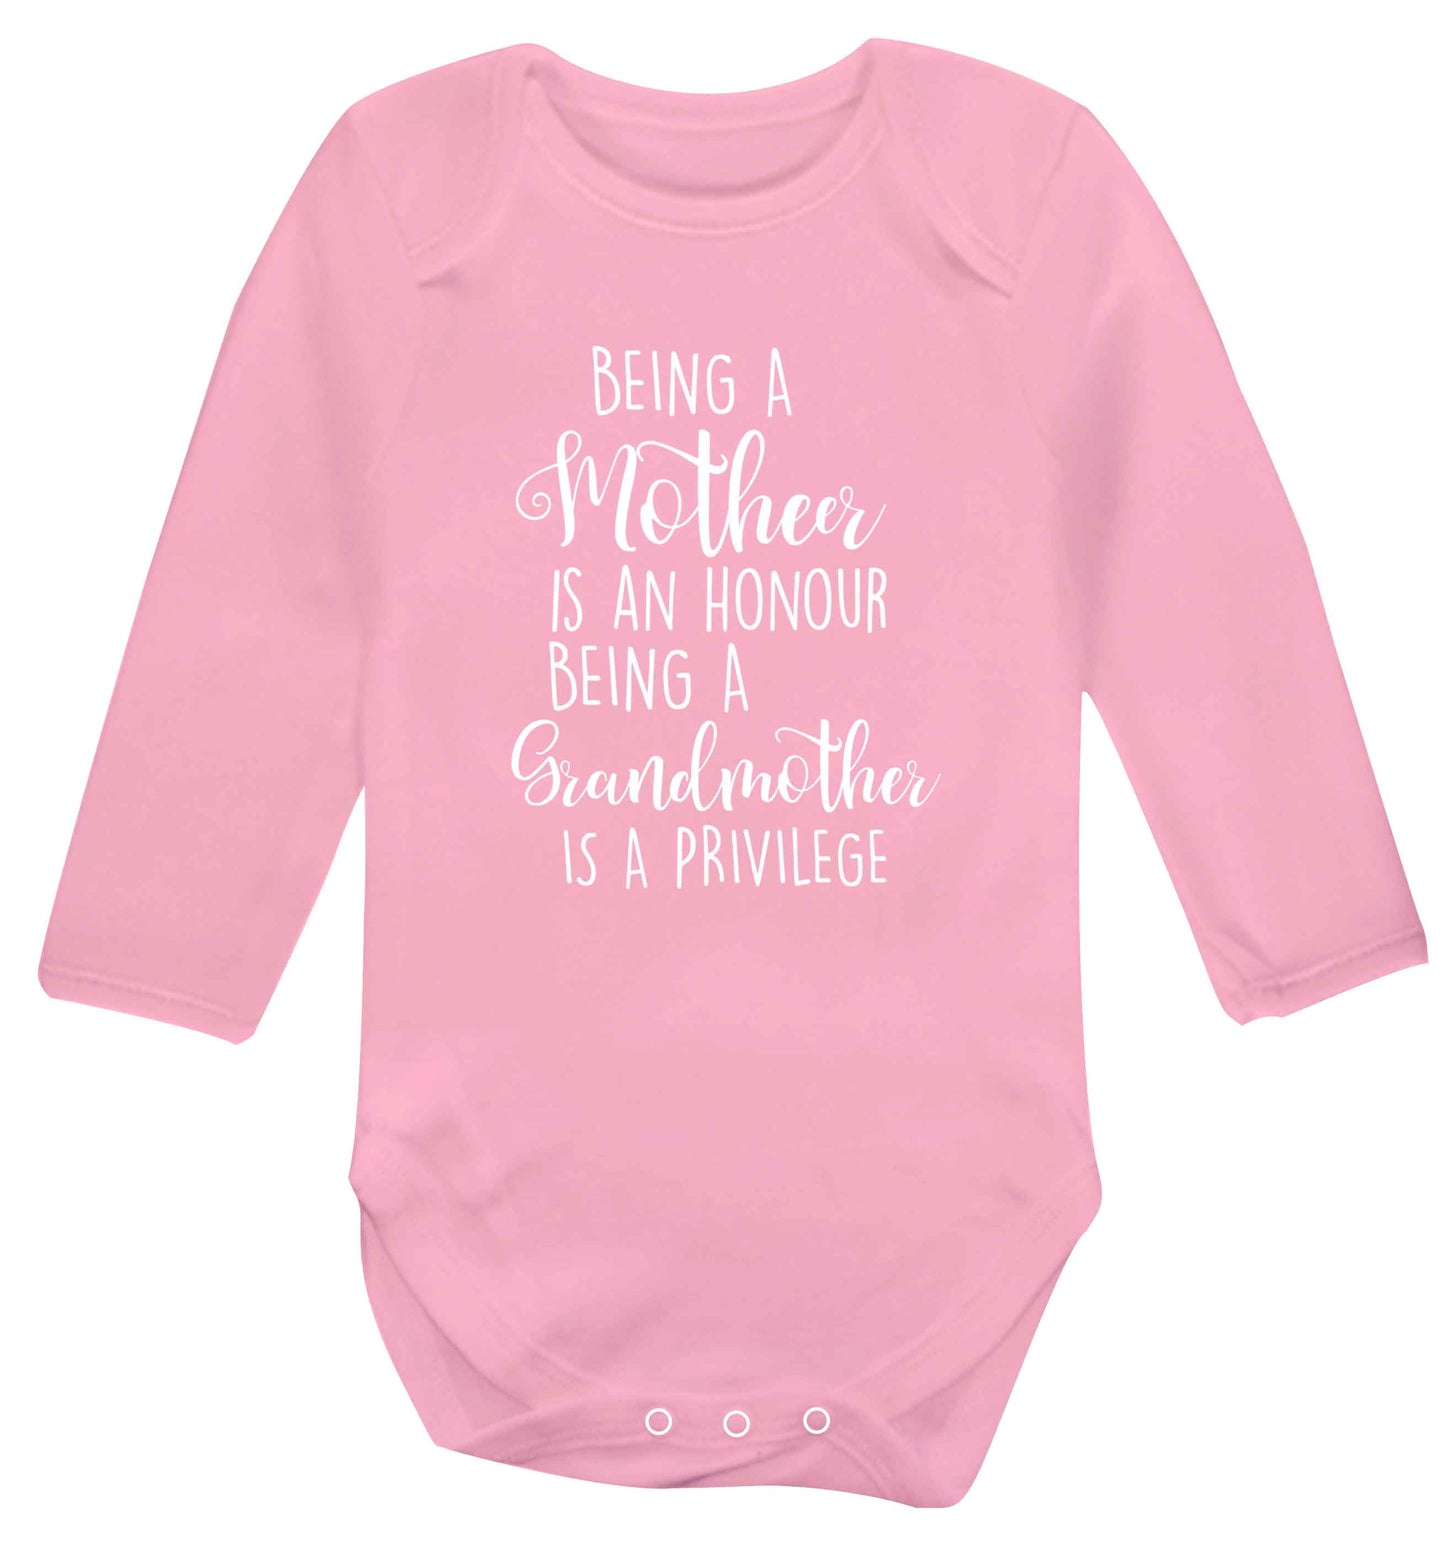 Being a mother is an honour being an grandmother is a privilege Baby Vest long sleeved pale pink 6-12 months